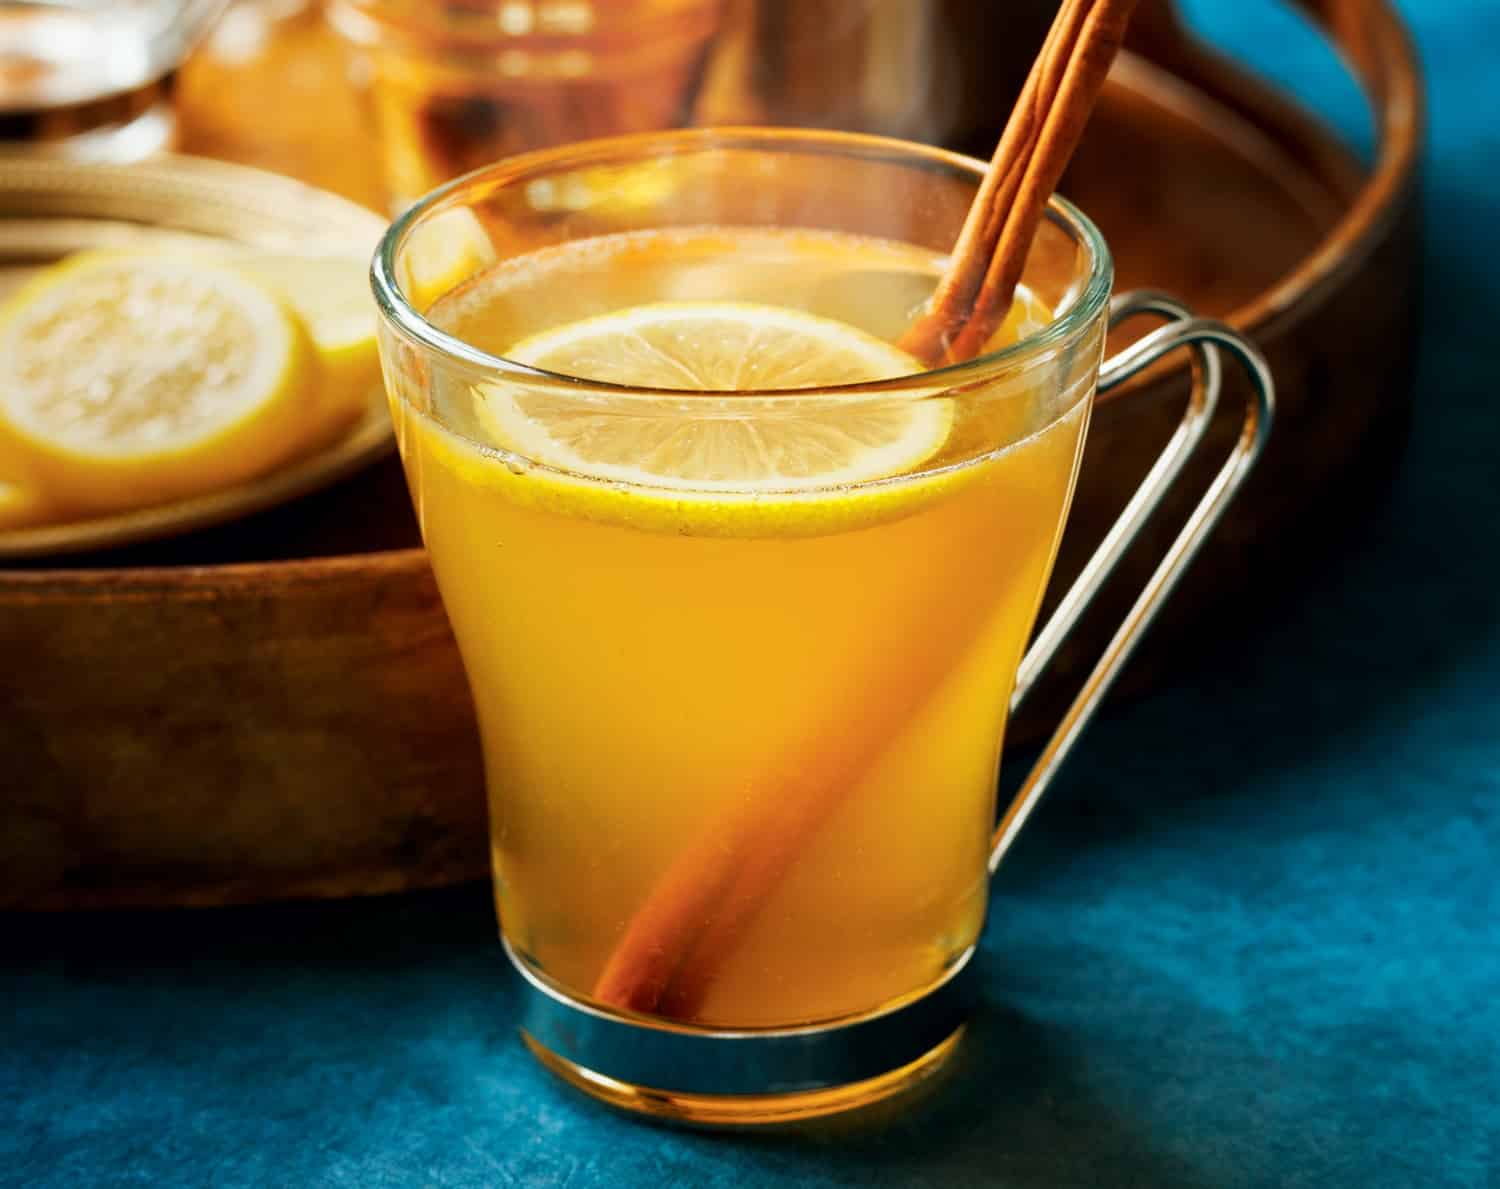 The Hot Toddy Duo – Aged & Infused